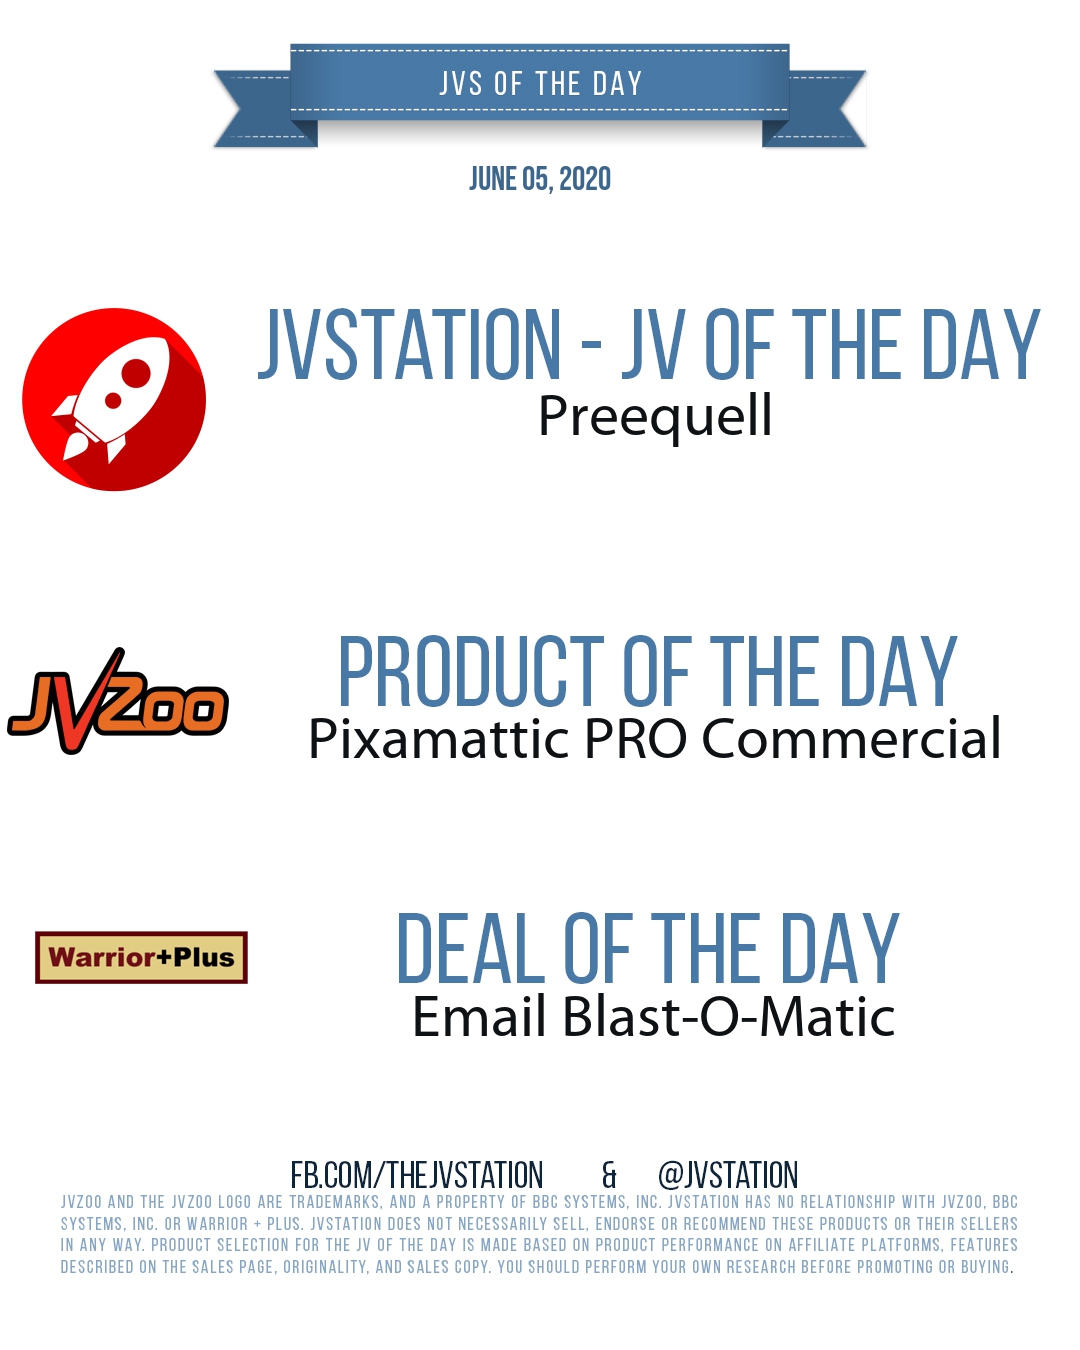 JVs of the day - June 05, 2020